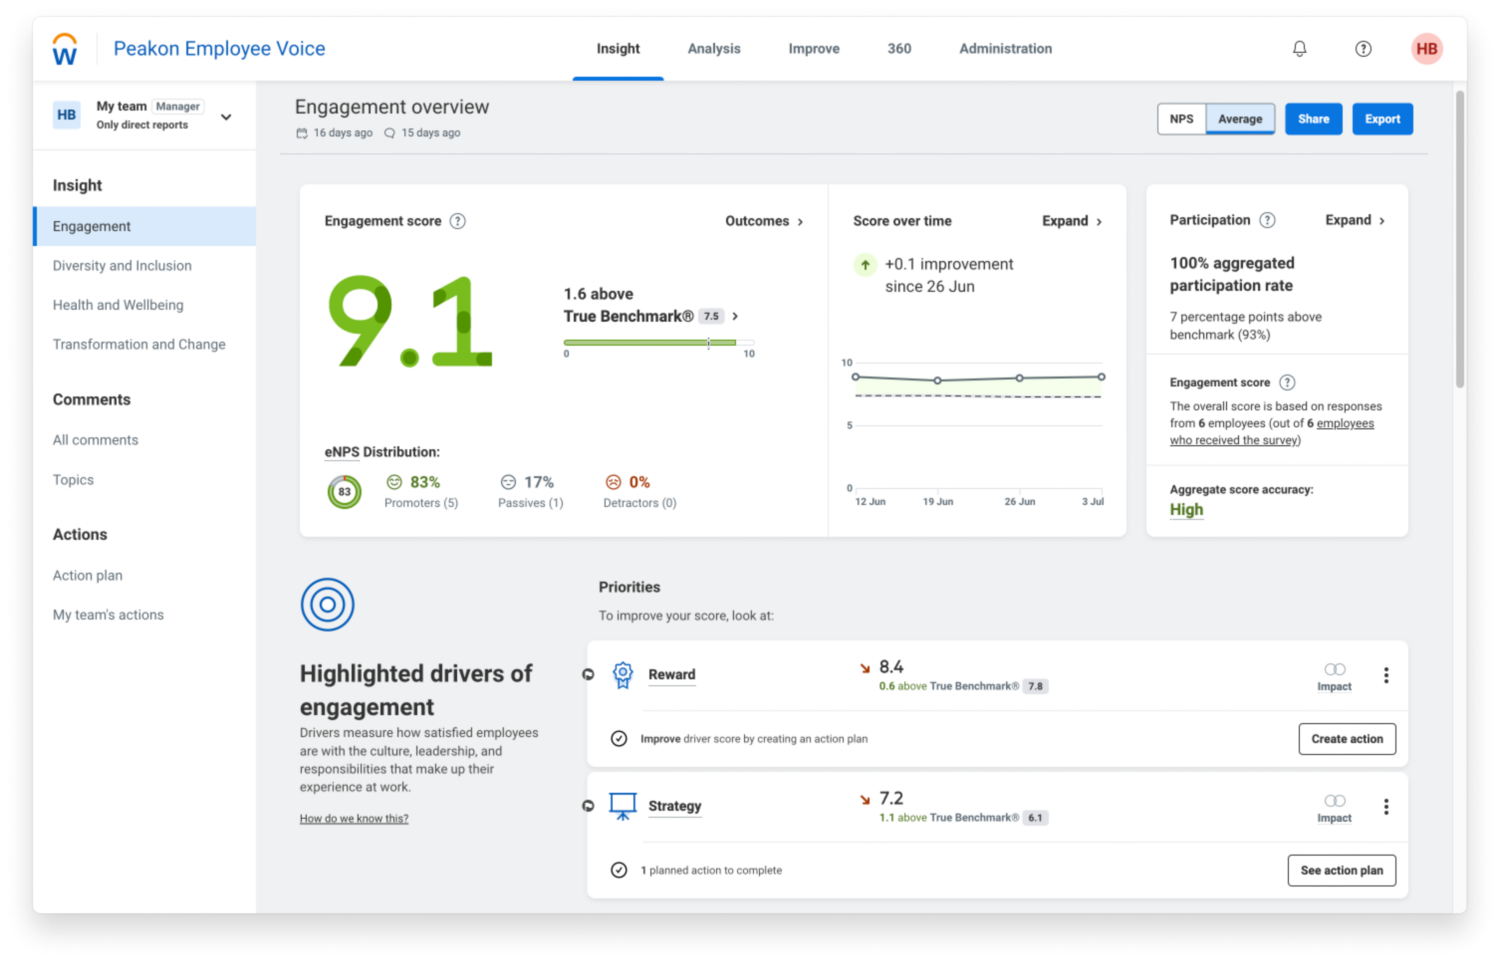 Dashboard della panoramica dell'engagement in Workday Peakon Employee Voice